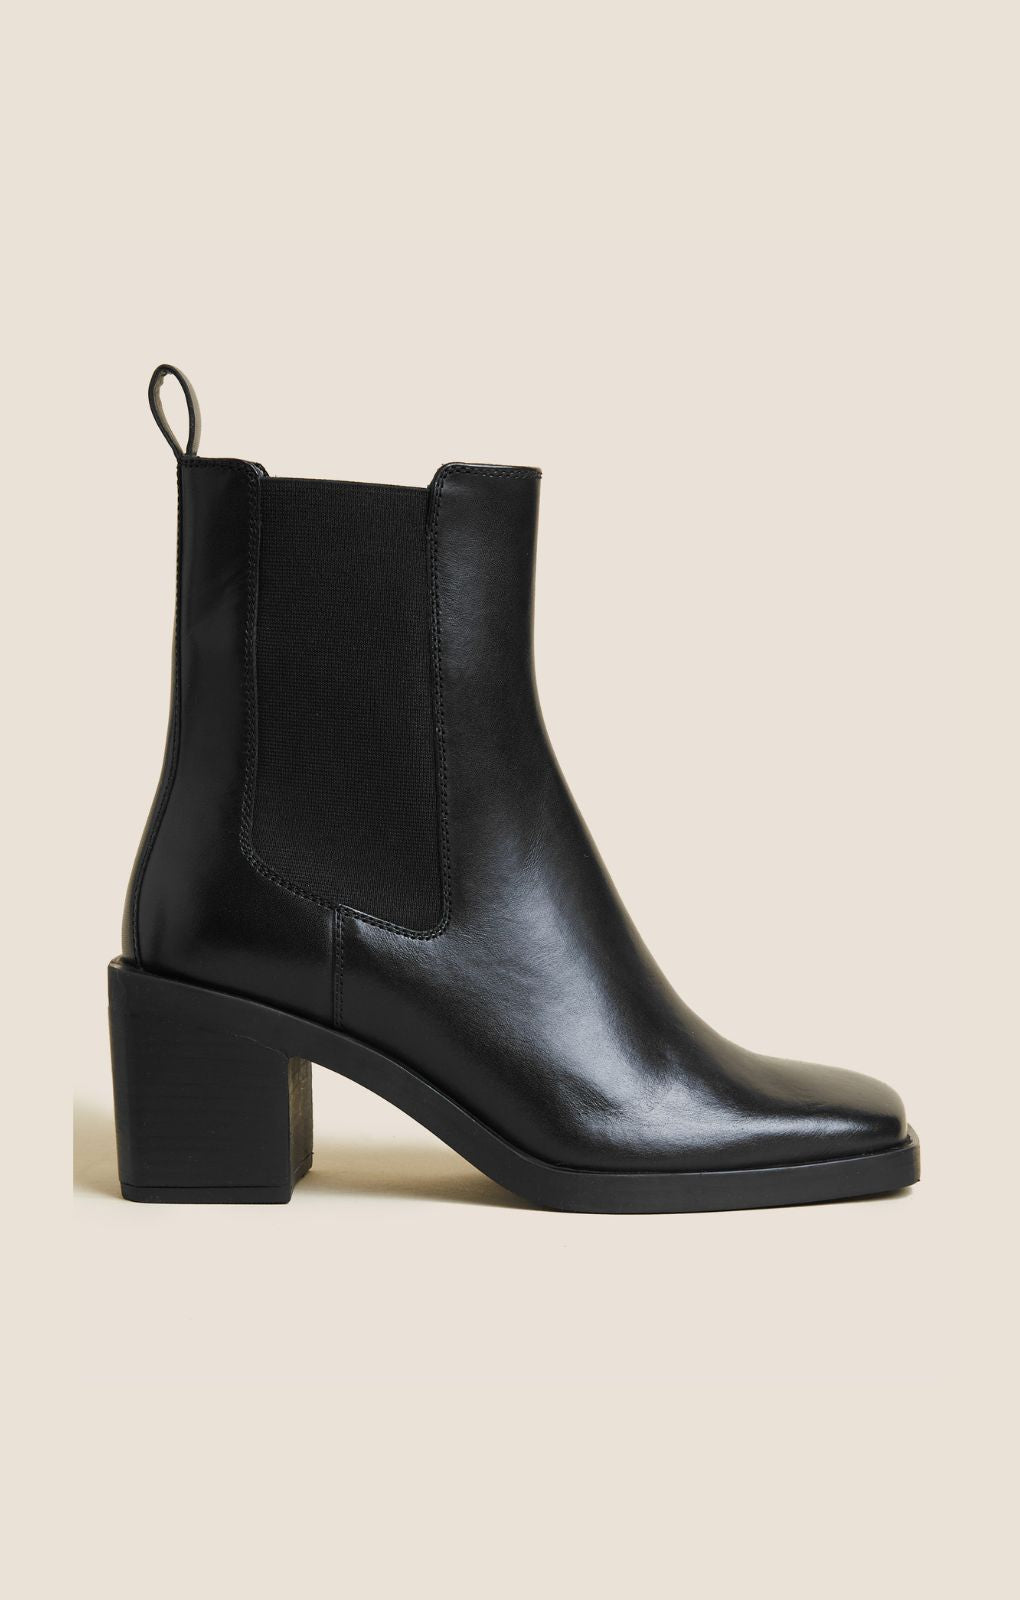 M&S Black Leather Block Heel Ankle Boots product image